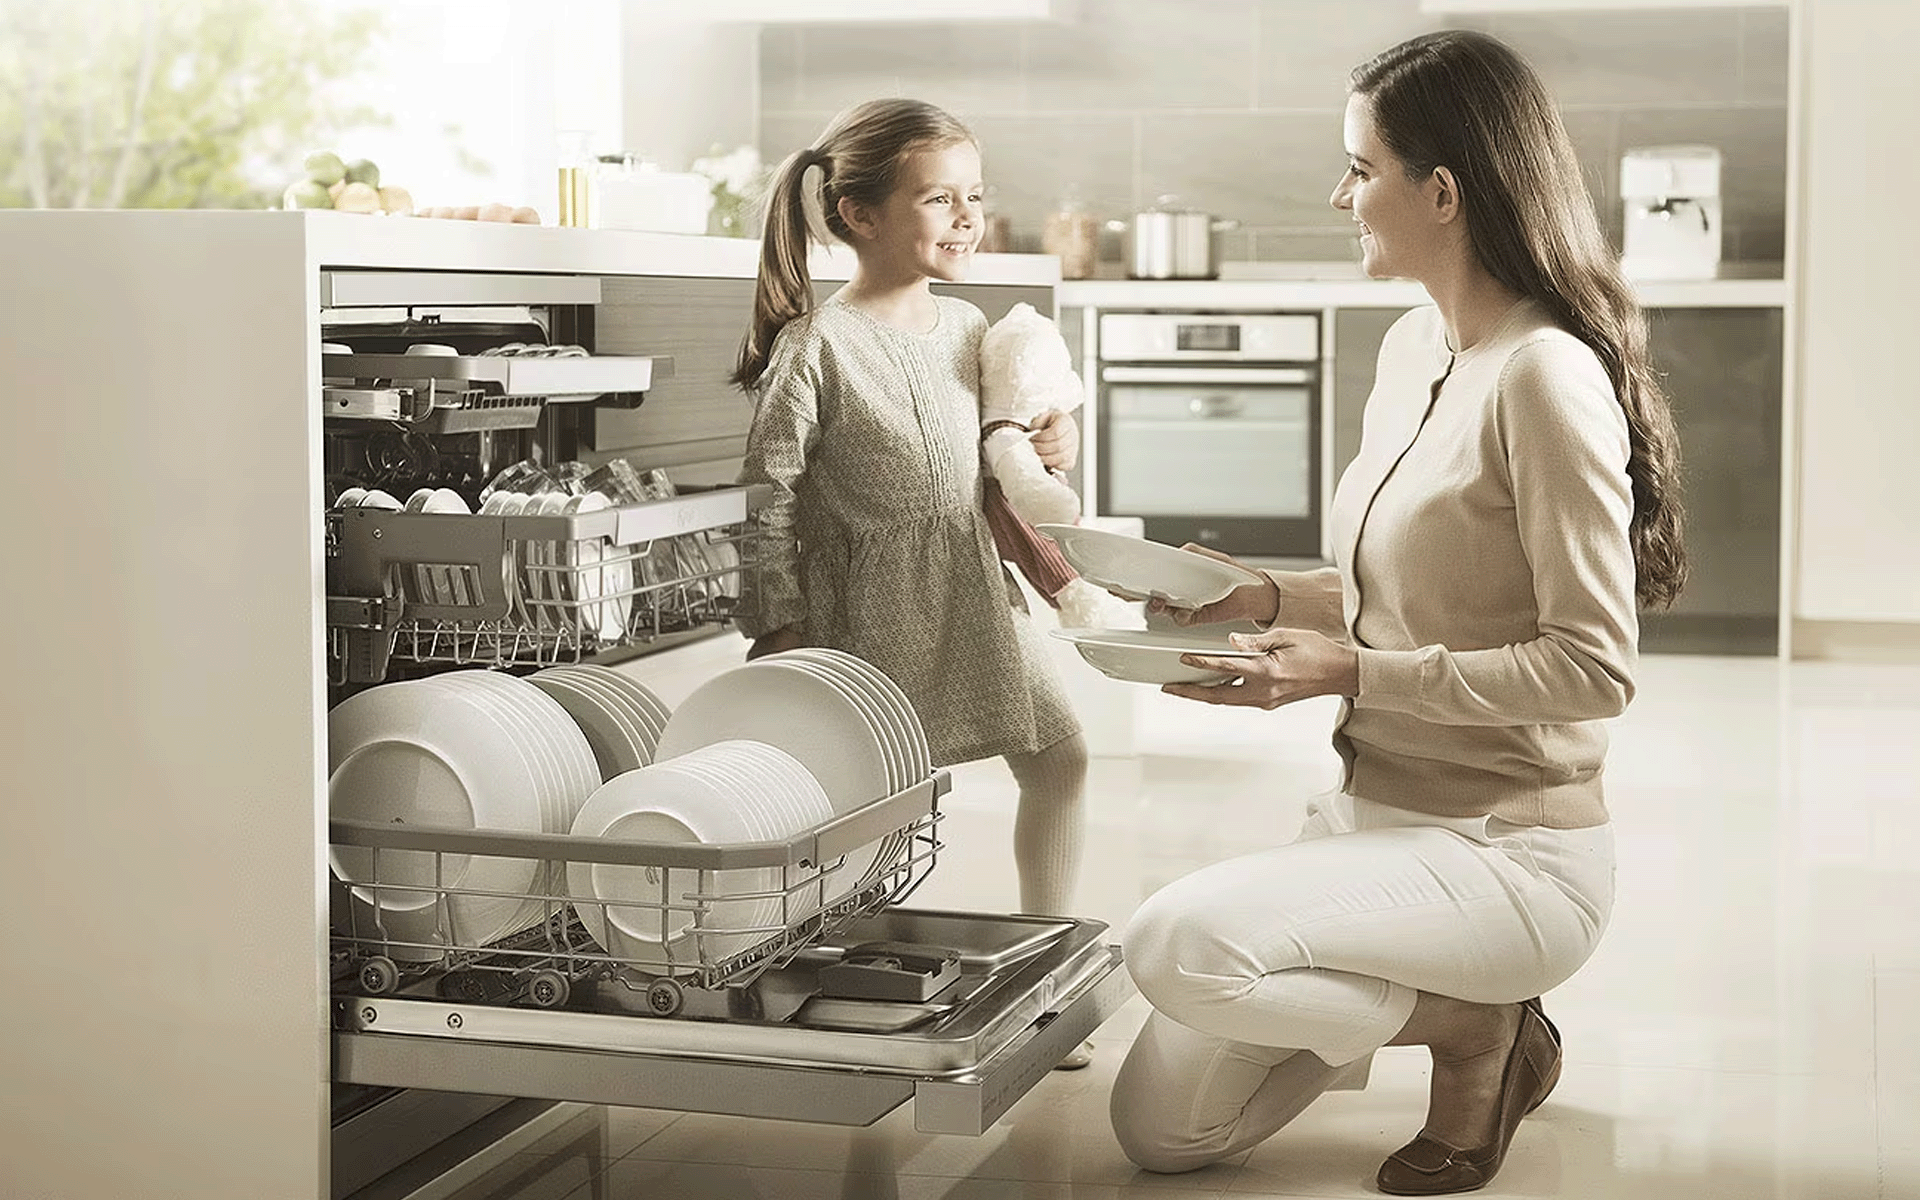 Mother kneeling down next to an open LG dishwasher, smiling at her young daughter standing next to her